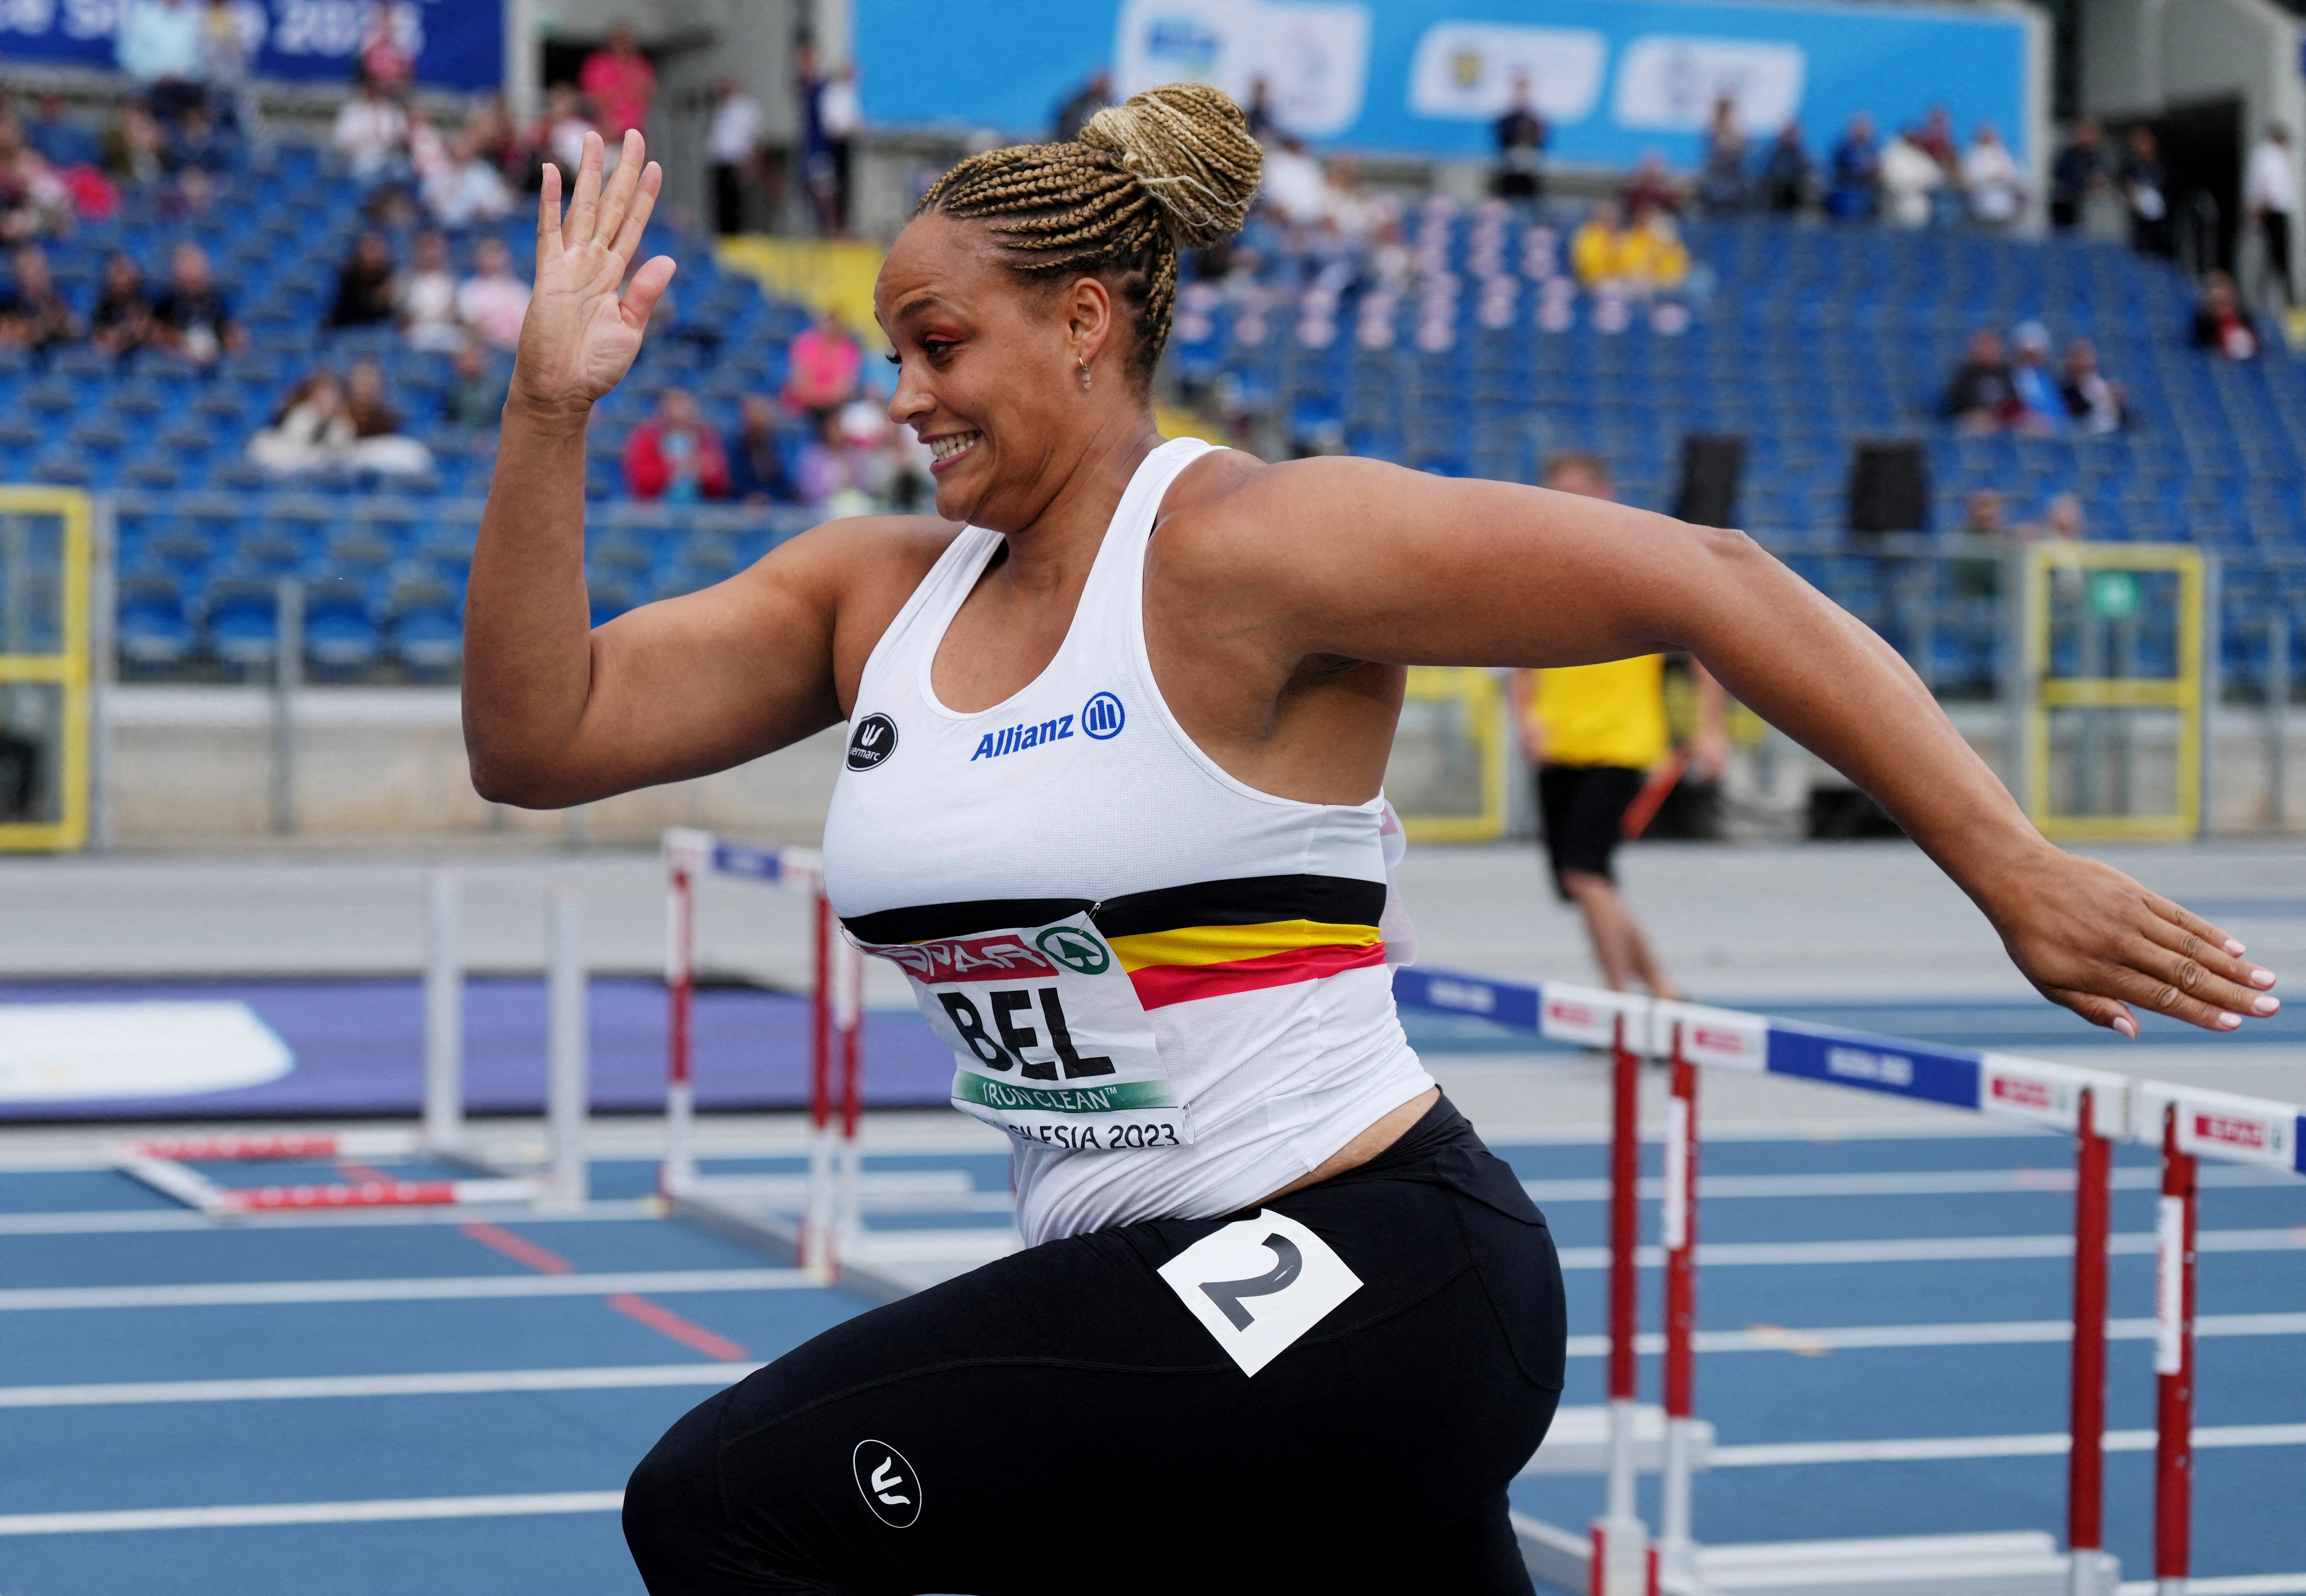 Belgian shot putter Boumkwo runs 100m hurdles to save team from disqualification Reuters